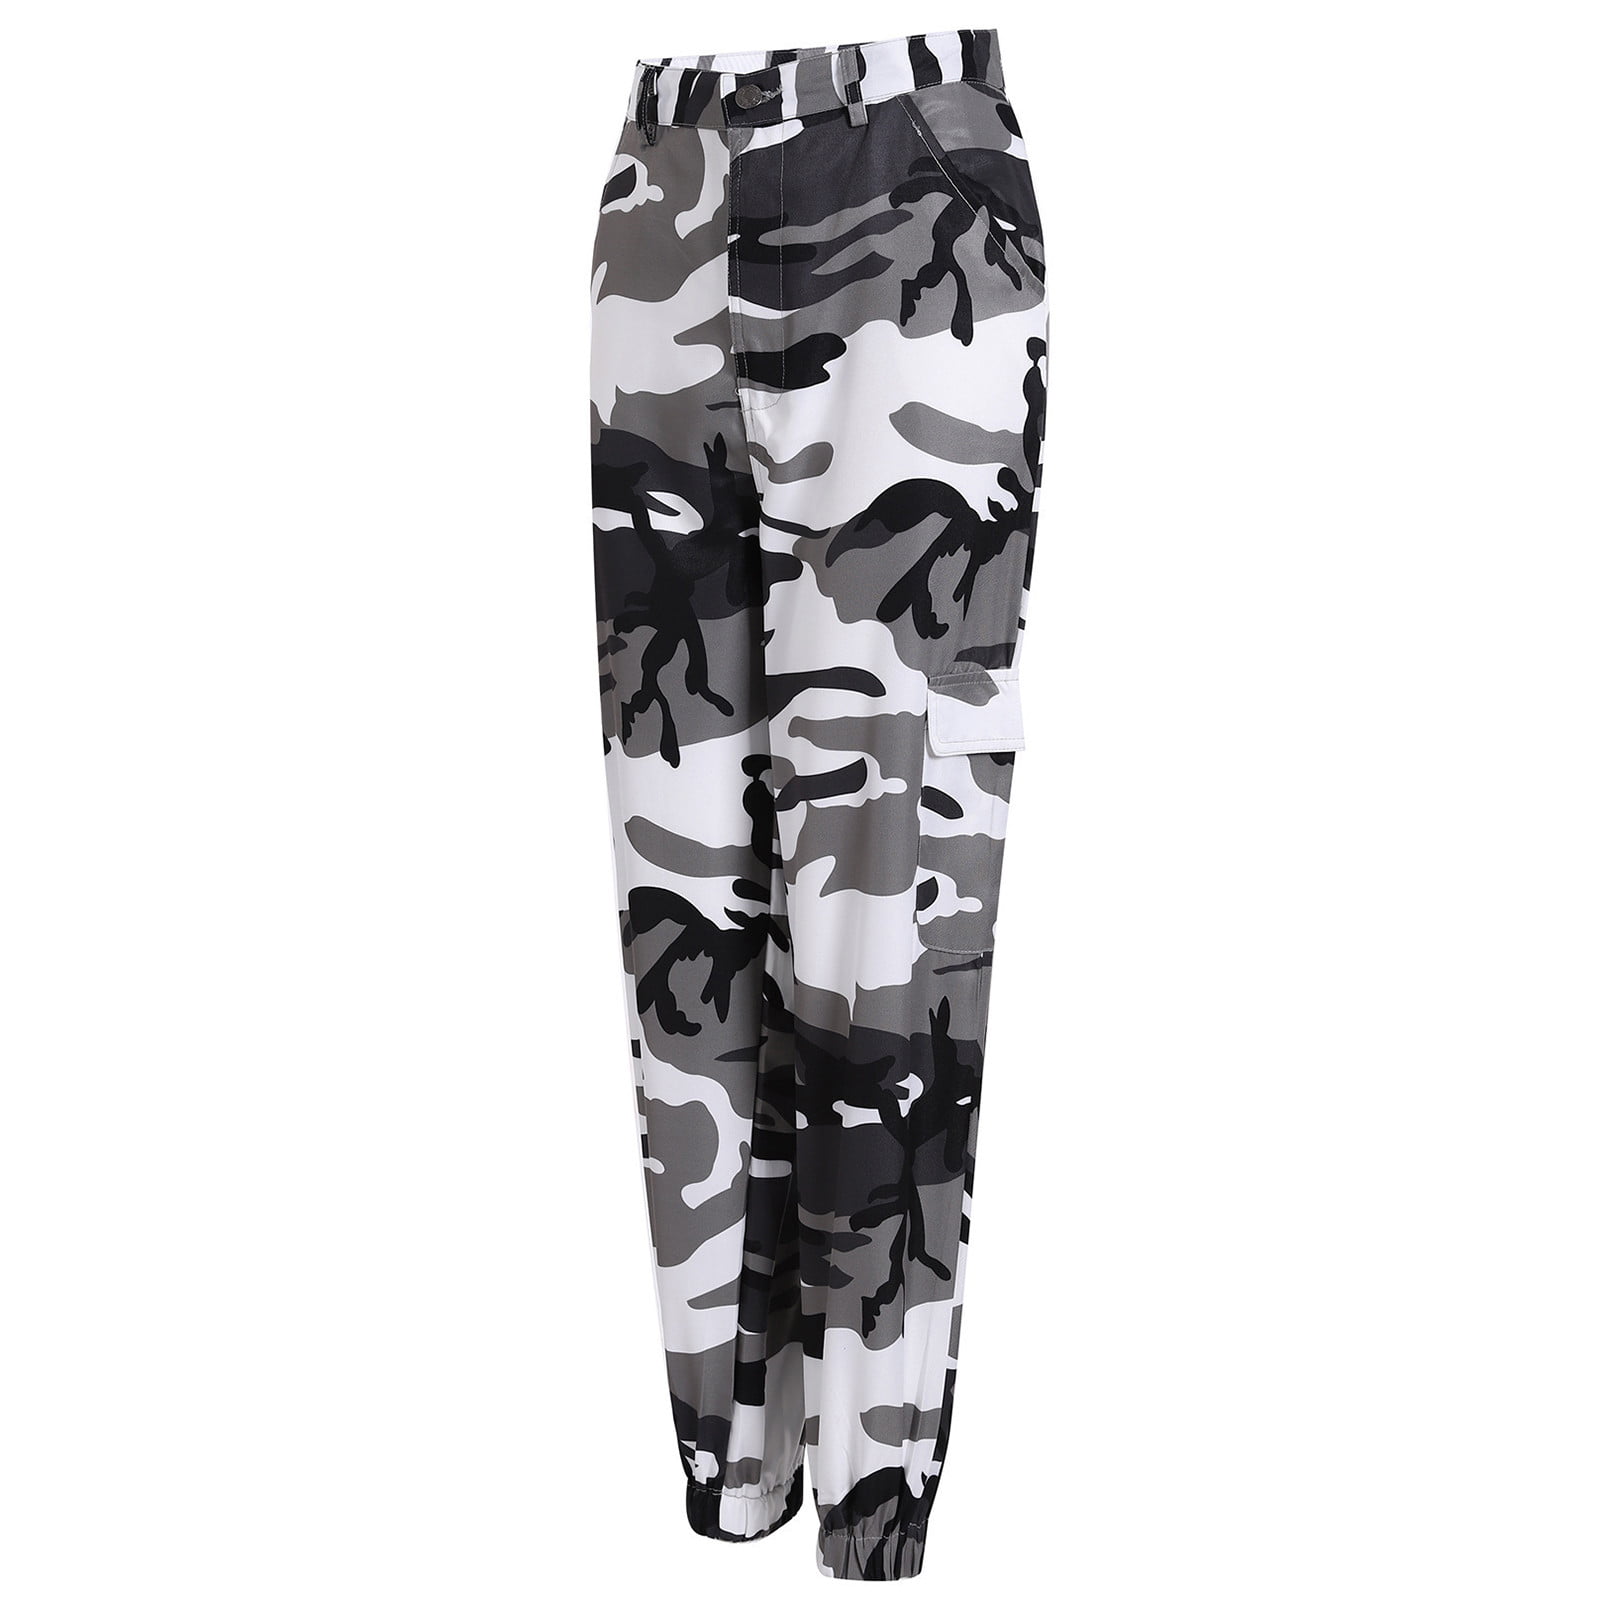 JWZUY Women's Tie Dye Camo Cargo Pants High Waisted Straight Leg Pants with  Pockets Camouflage L 